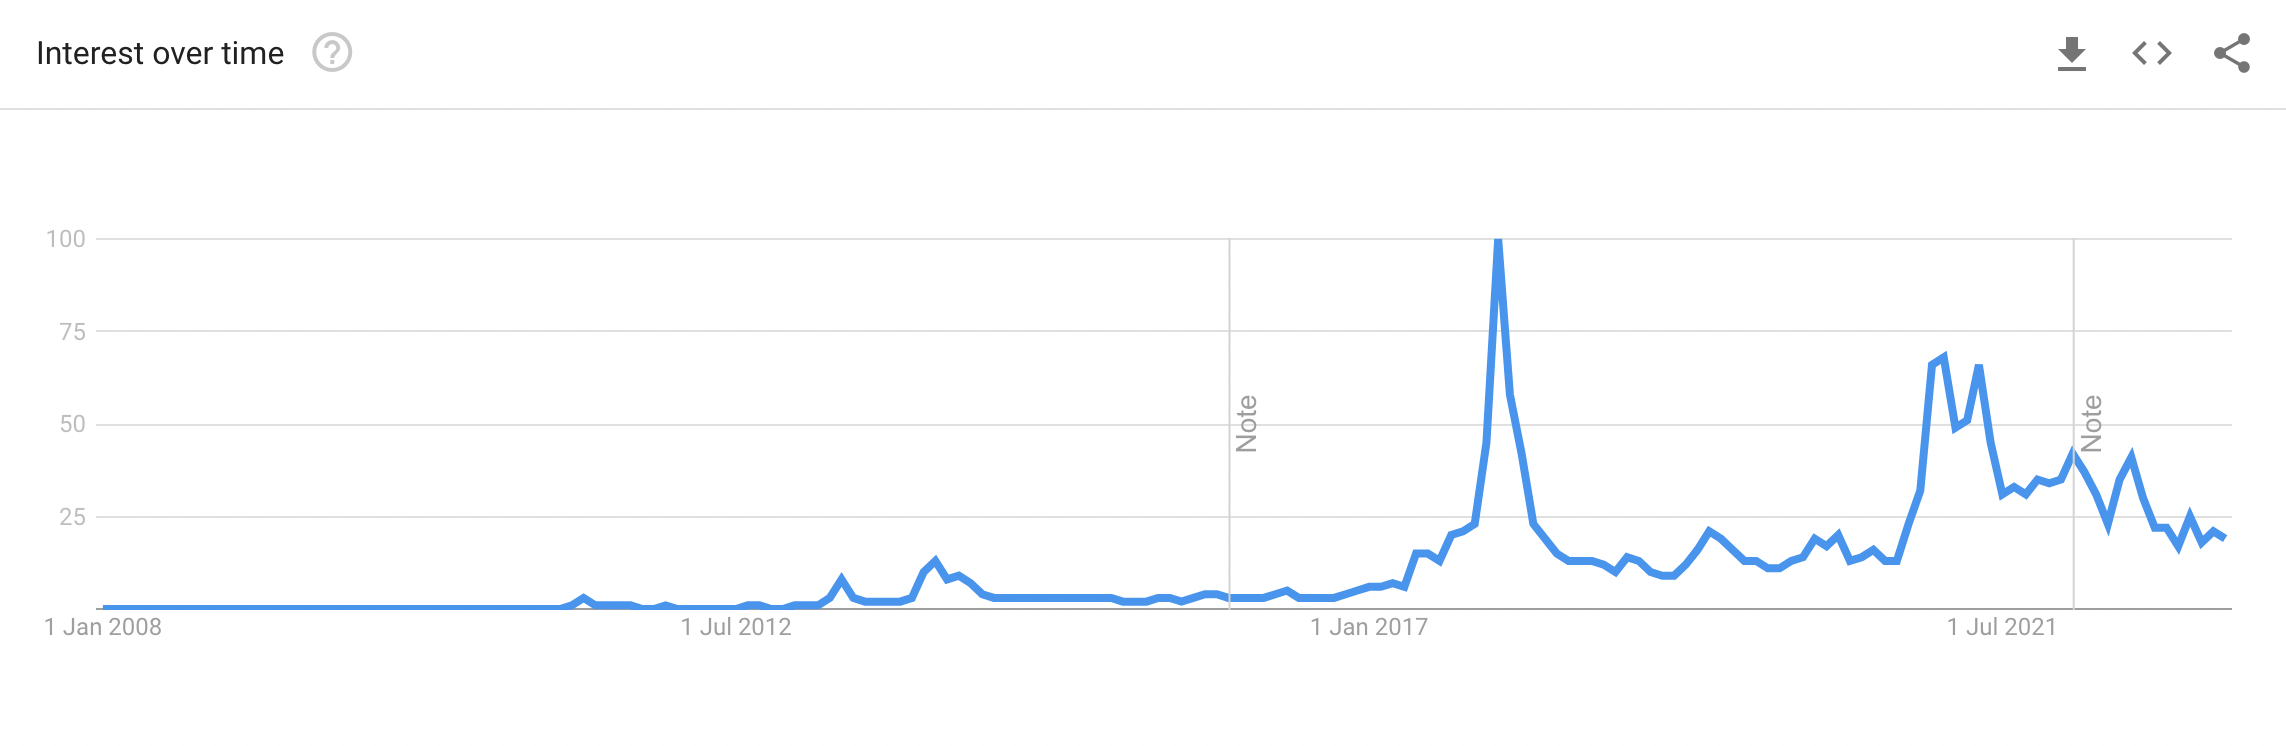 Interest in Bitcoin over time.  Source: Google Trends